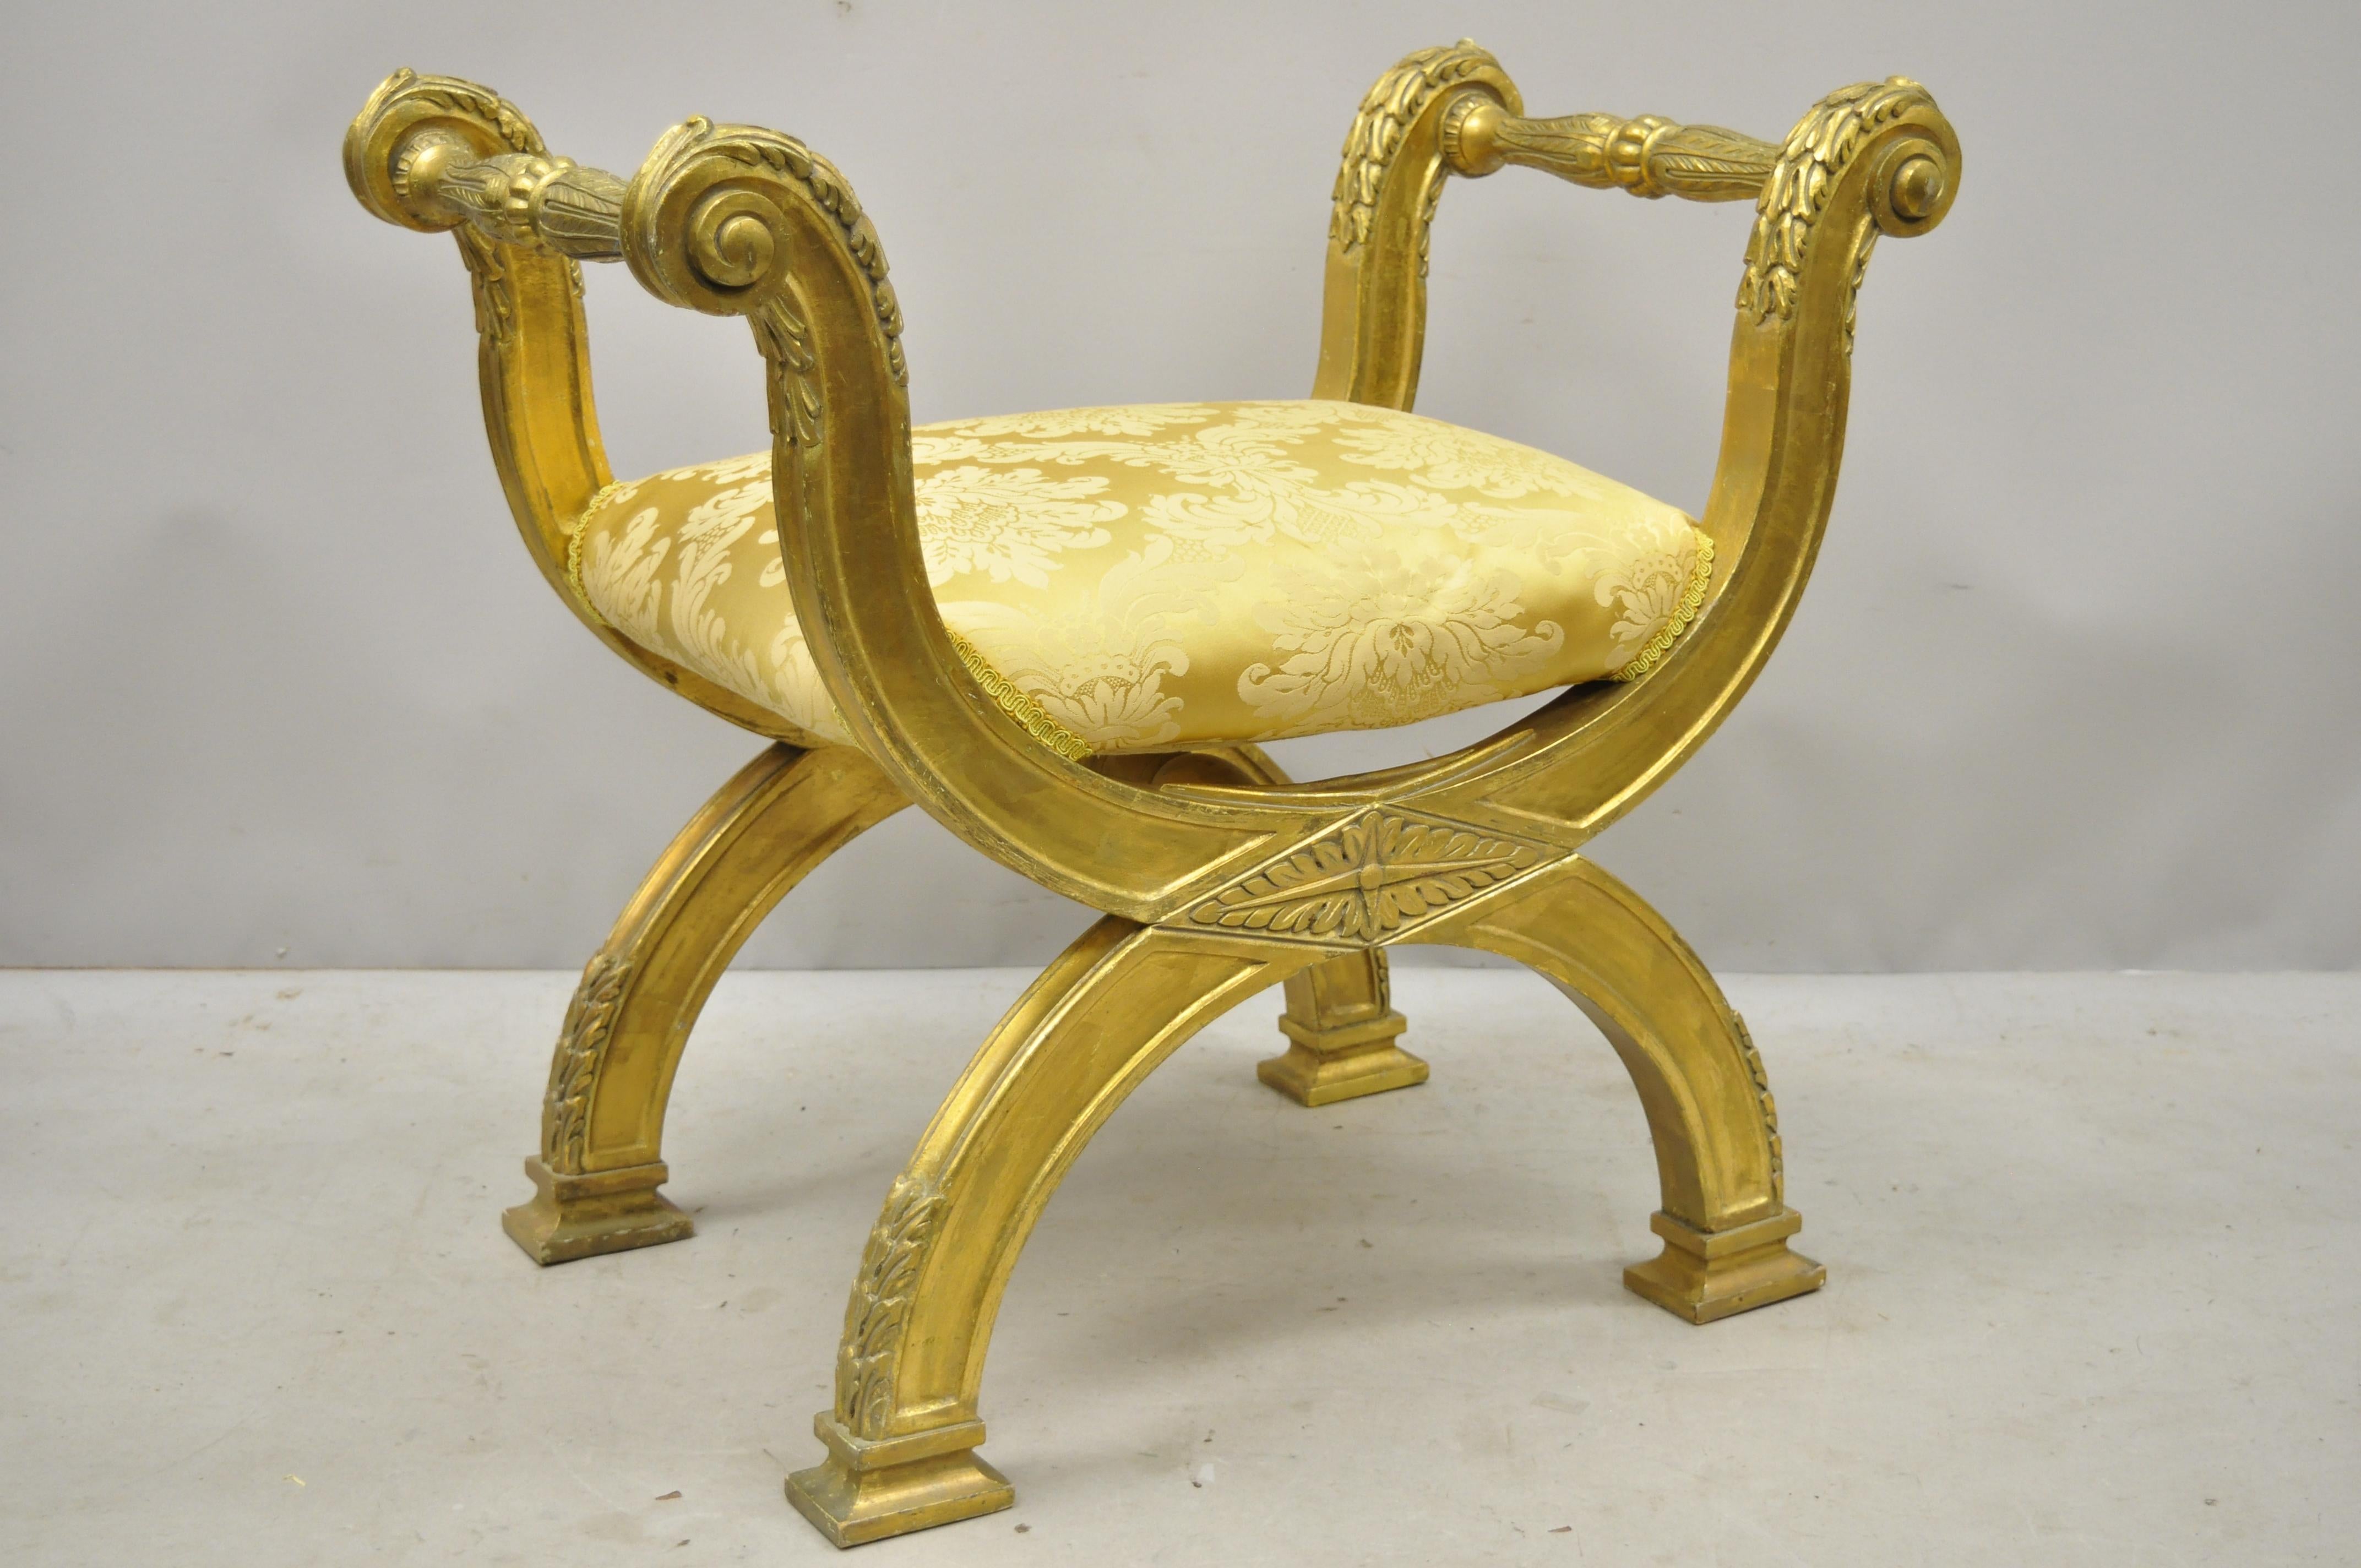 Gold Italian neoclassical style giltwood carved curule bench attributed to Maitland Smith. Item features solid wood frame, gold distressed finish, nicely carved details, very nice vintage item, great style and form. Maker unconfirmed but possibly by